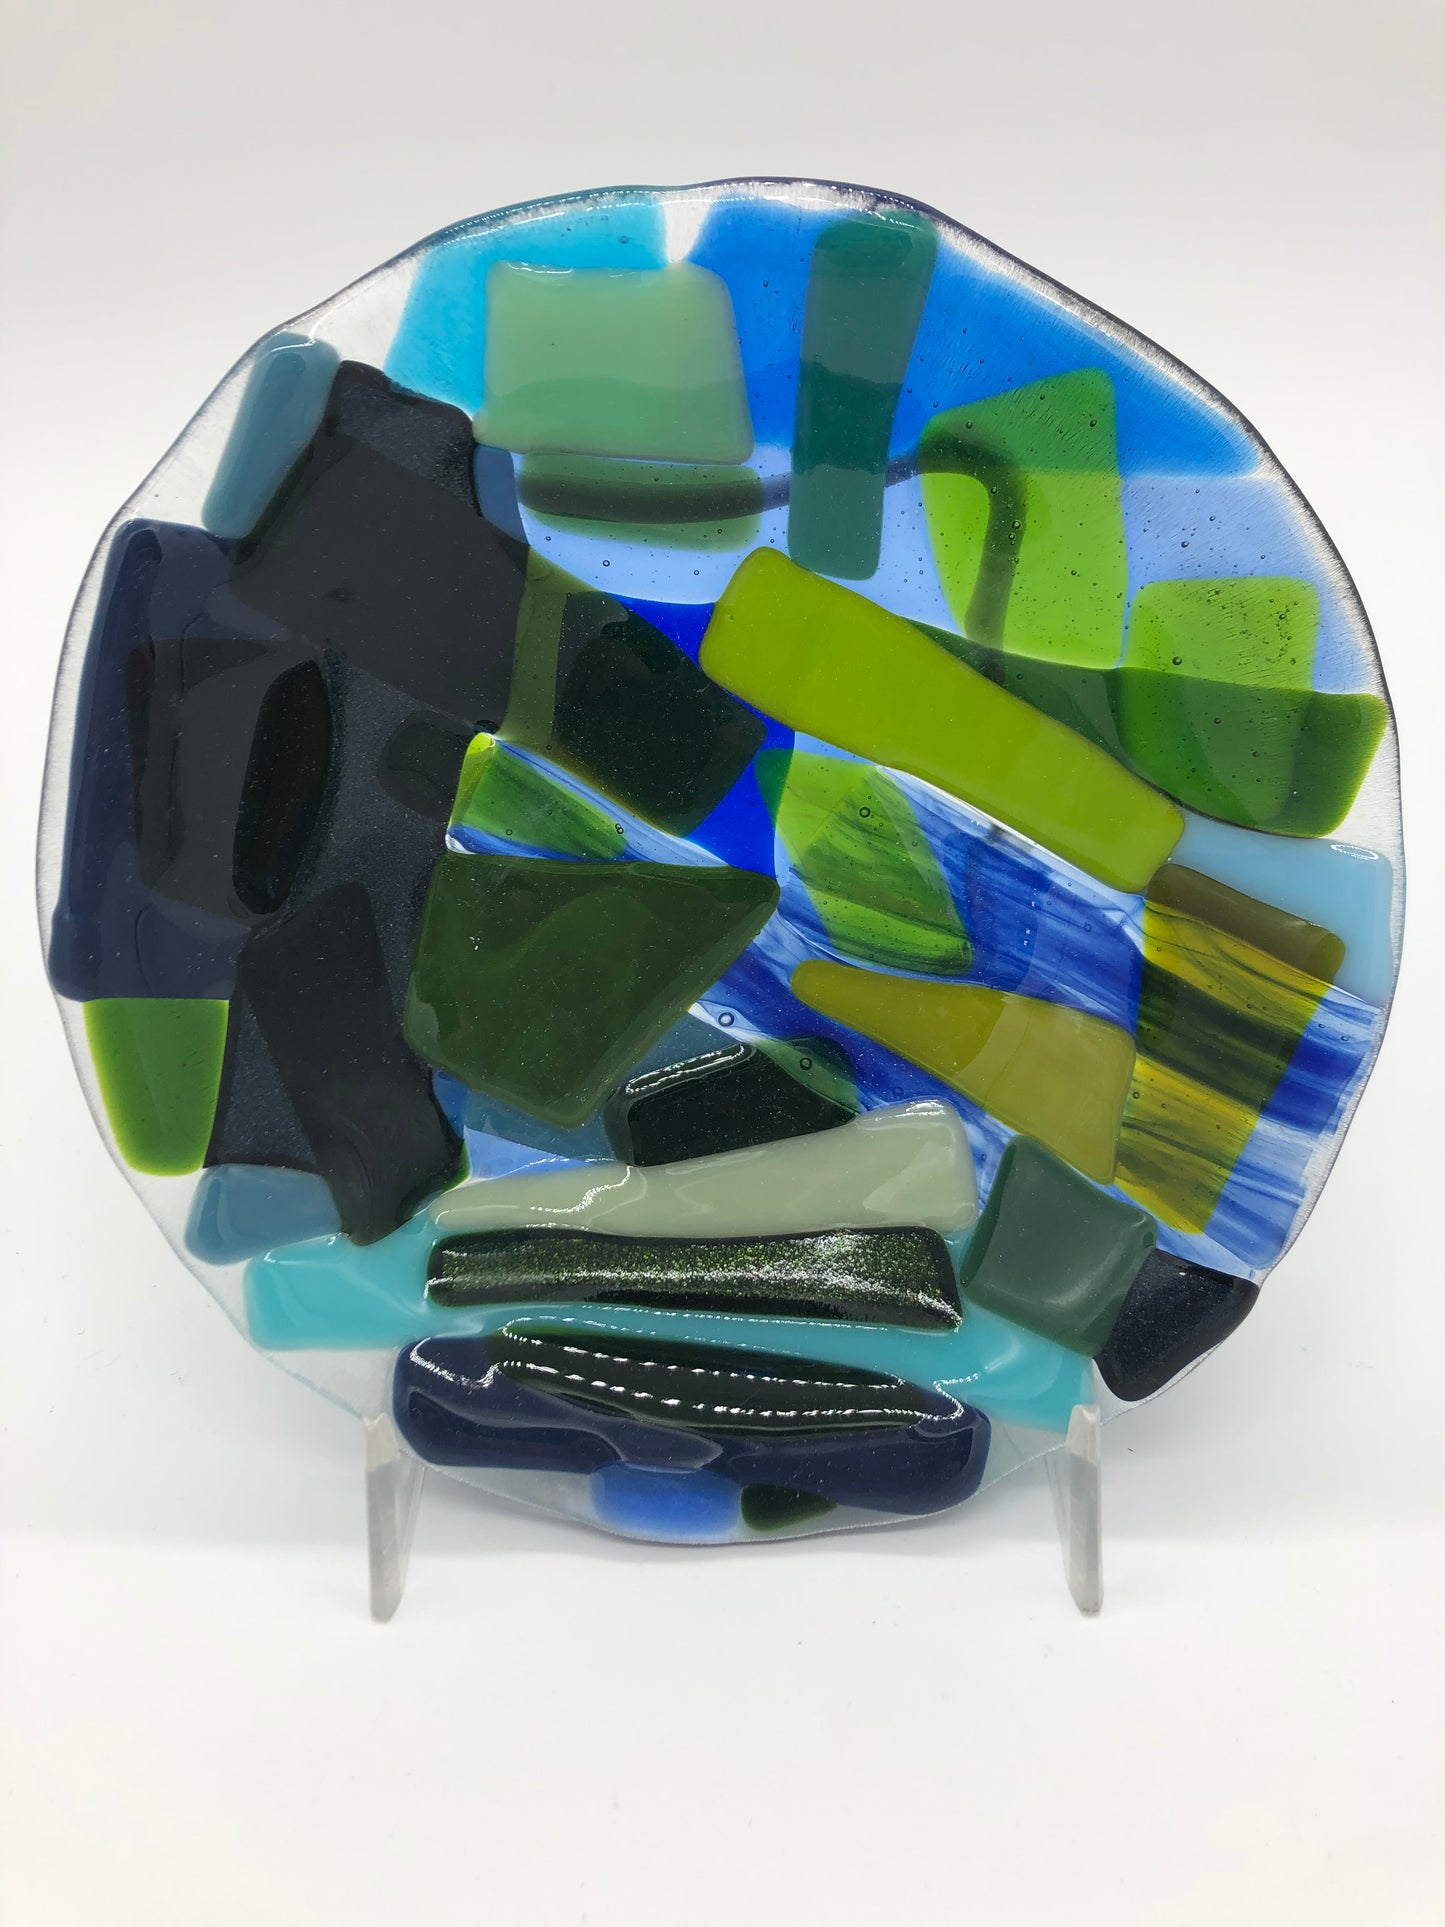 Small Round Bowl - Green and Blue on Clear